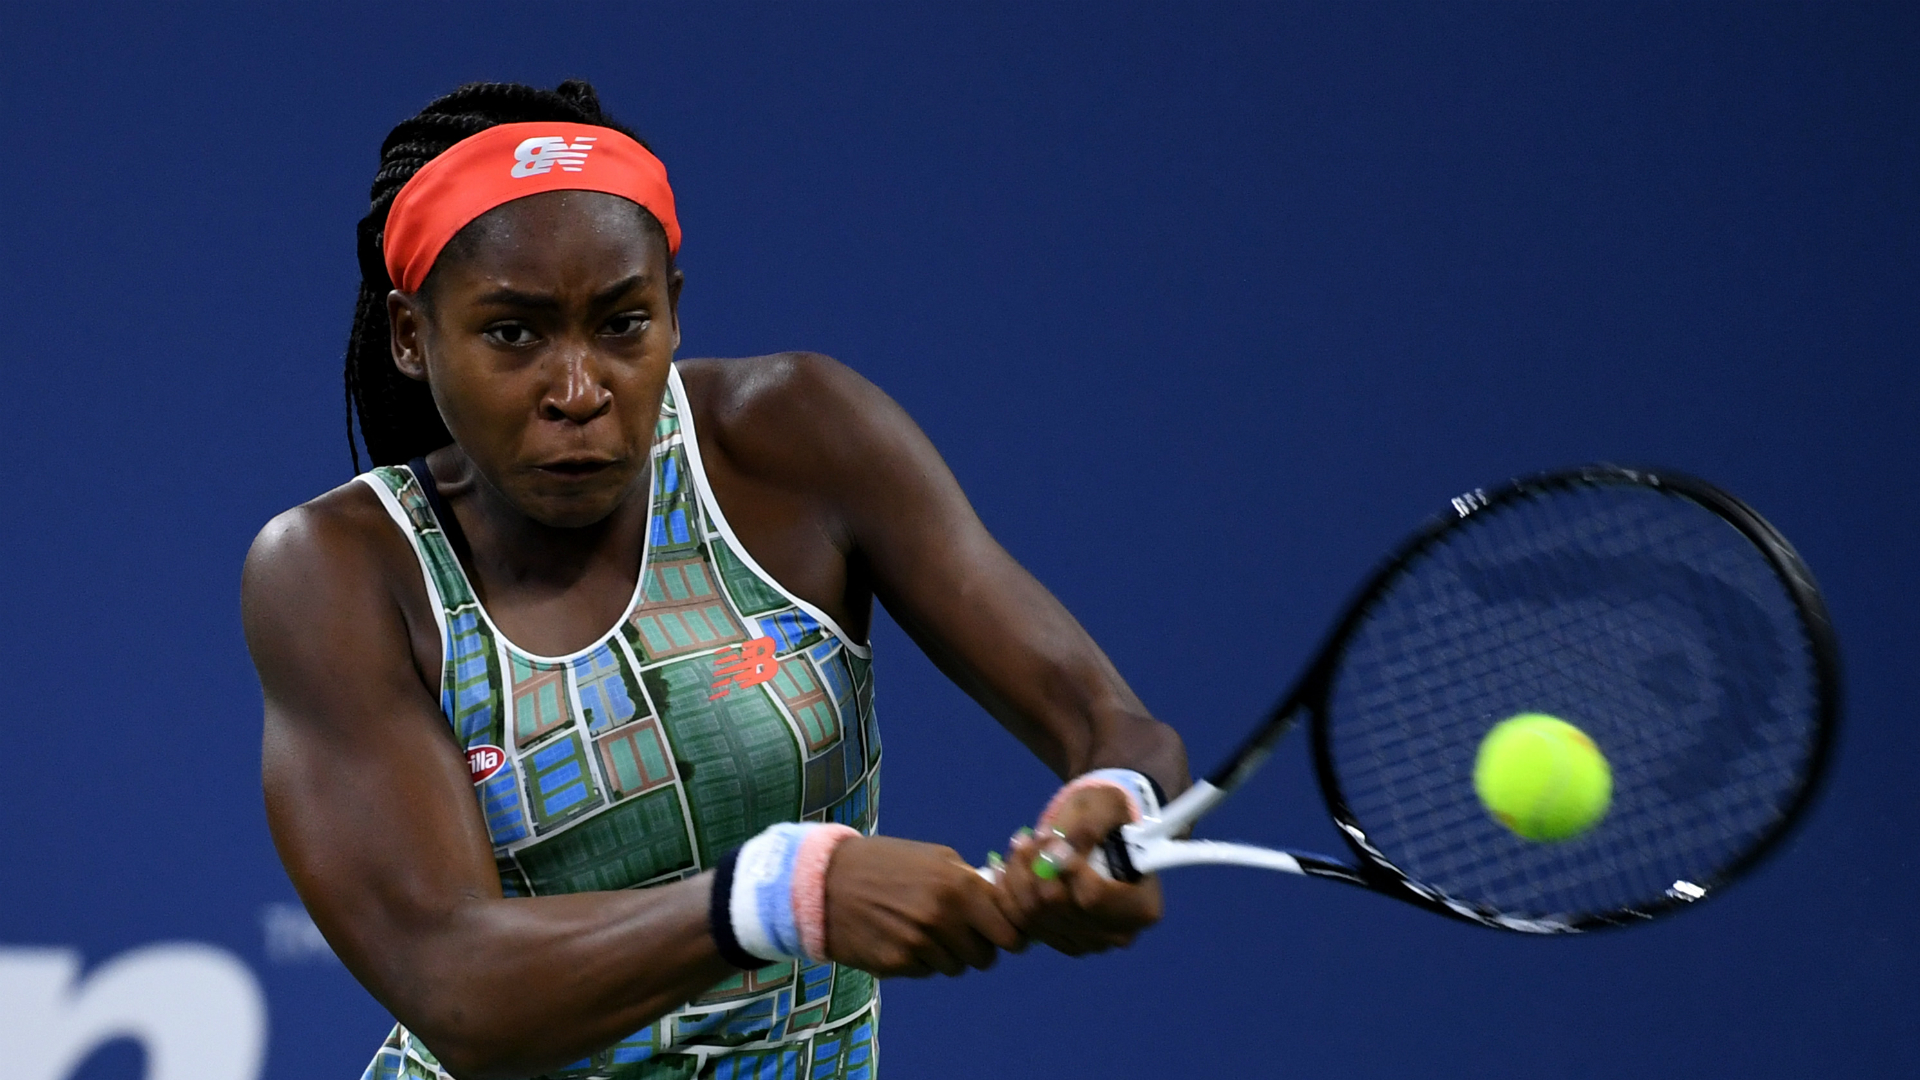 U.S. Open: Coco Gauff's emergence has caused quite a stir, but is the scrutiny healthy ...